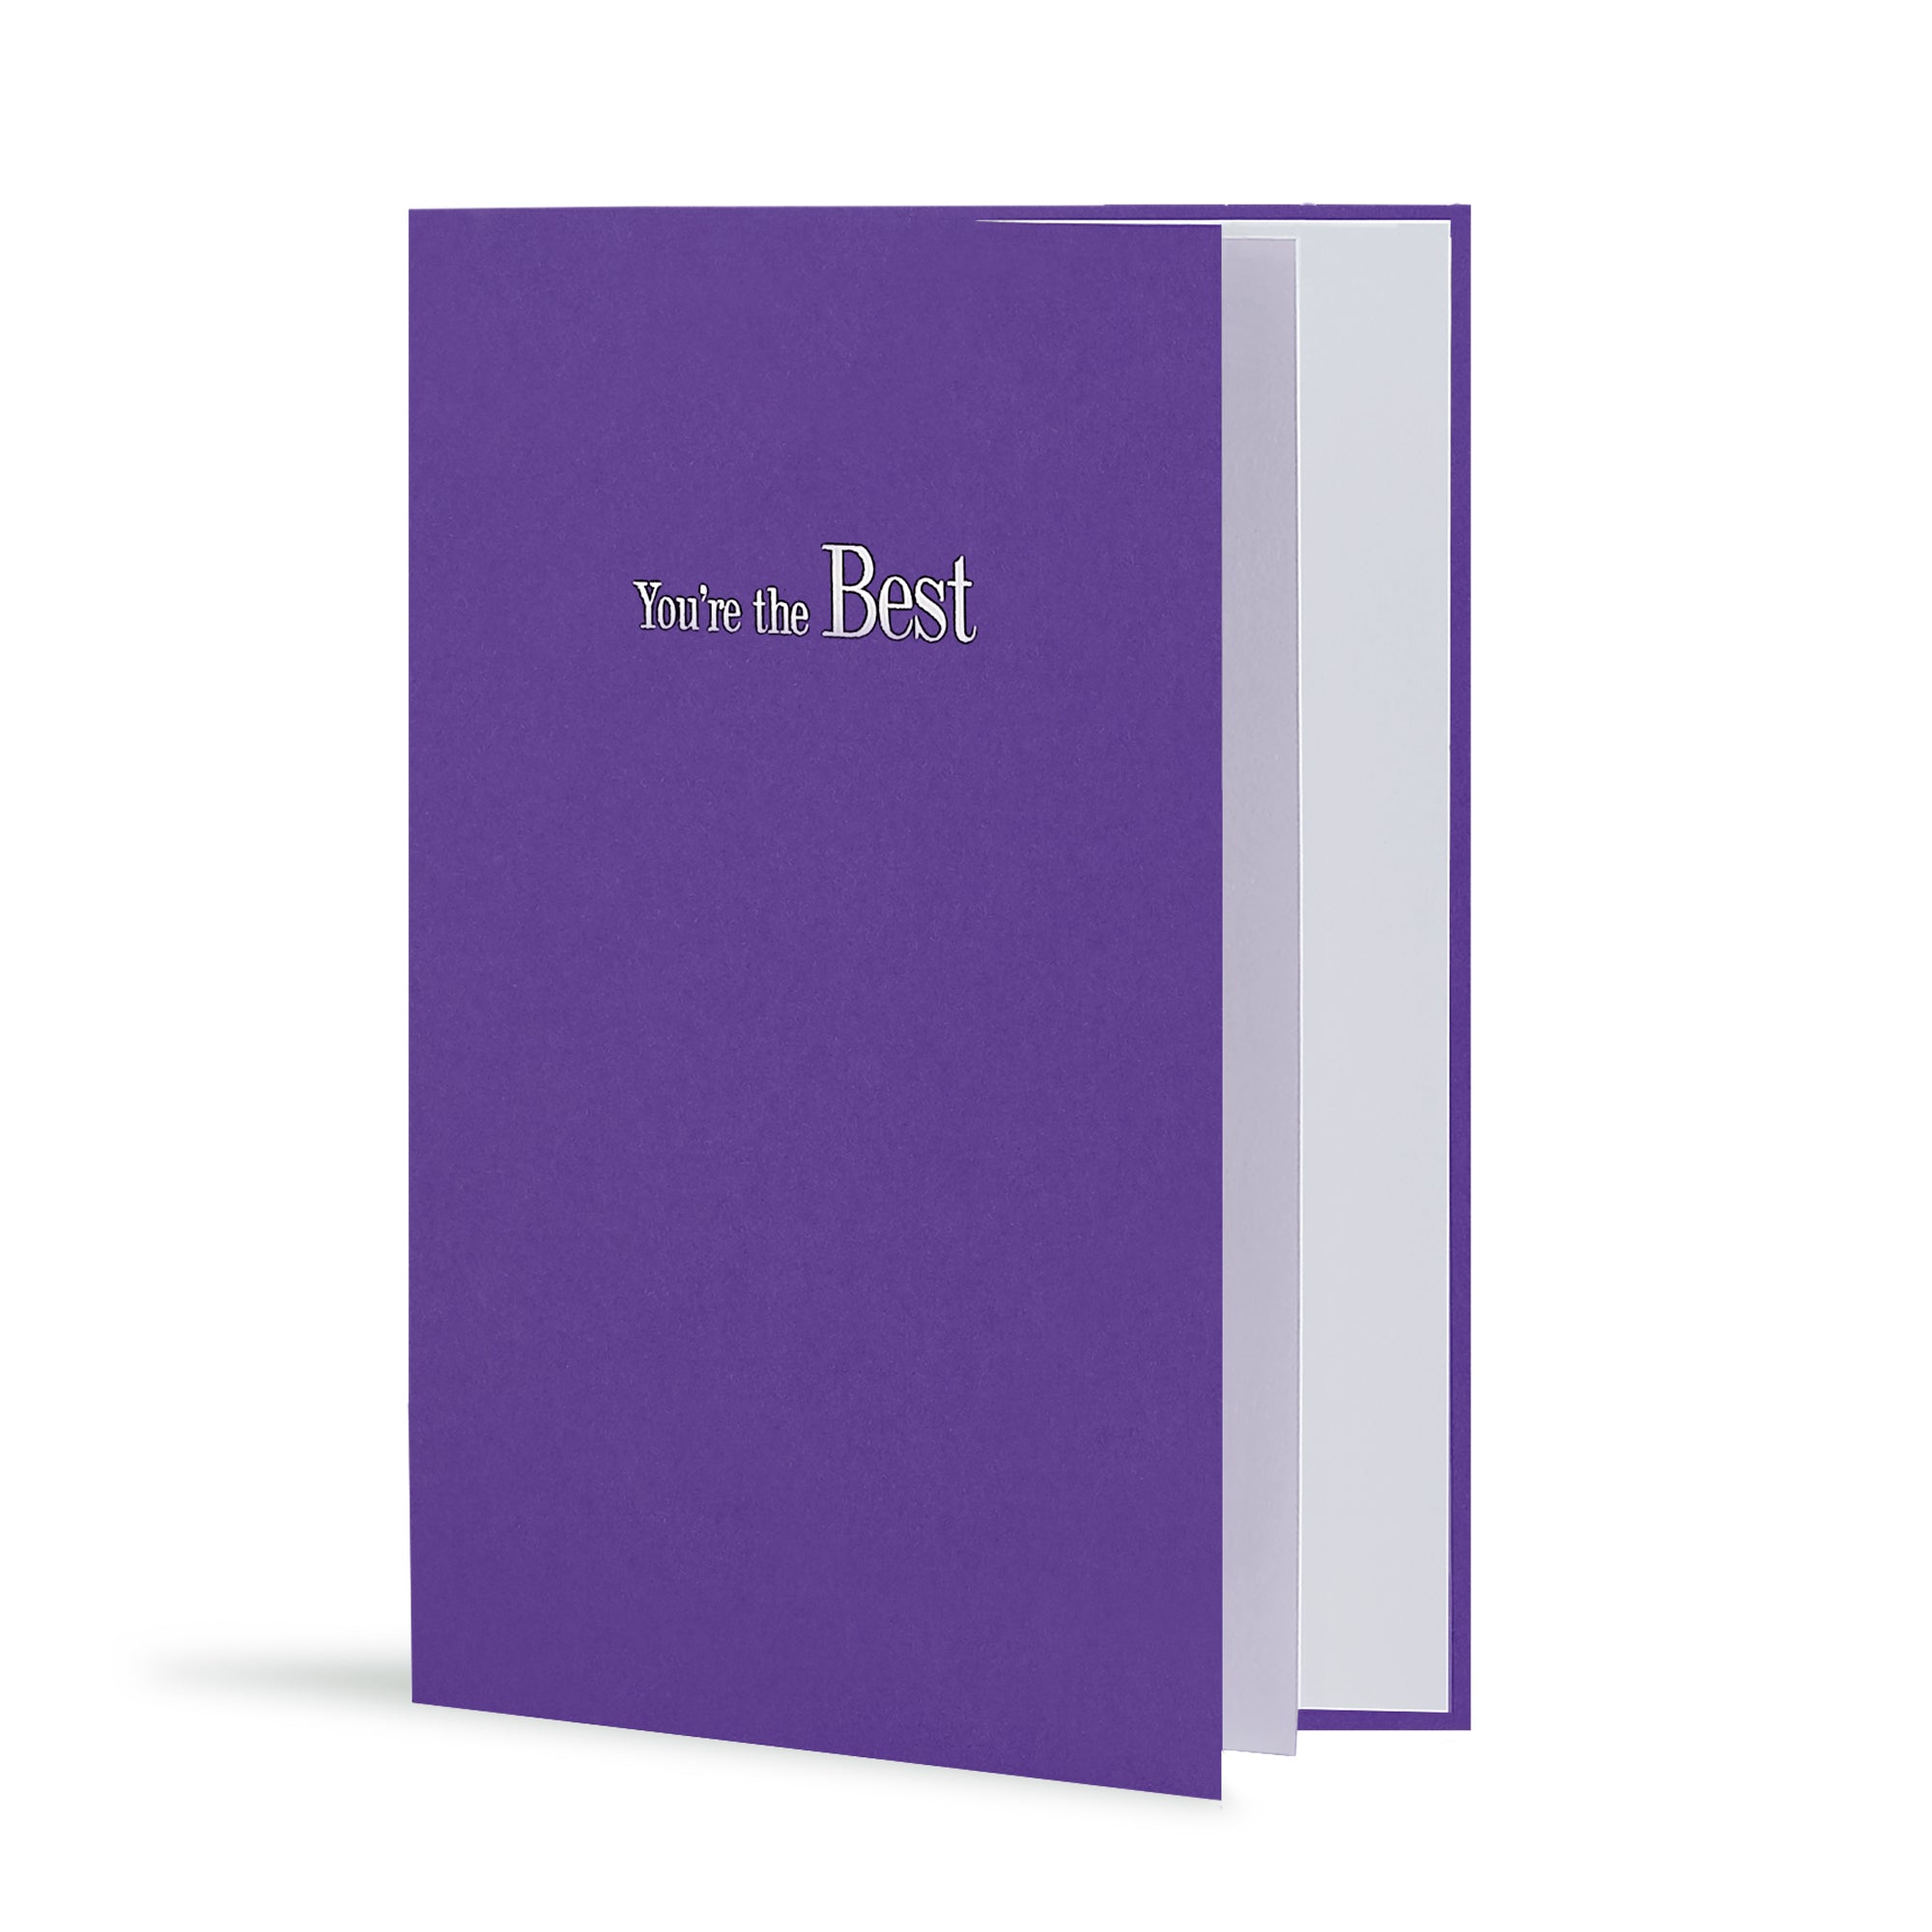 You're The Best Greeting Card in Warm Purple, Side